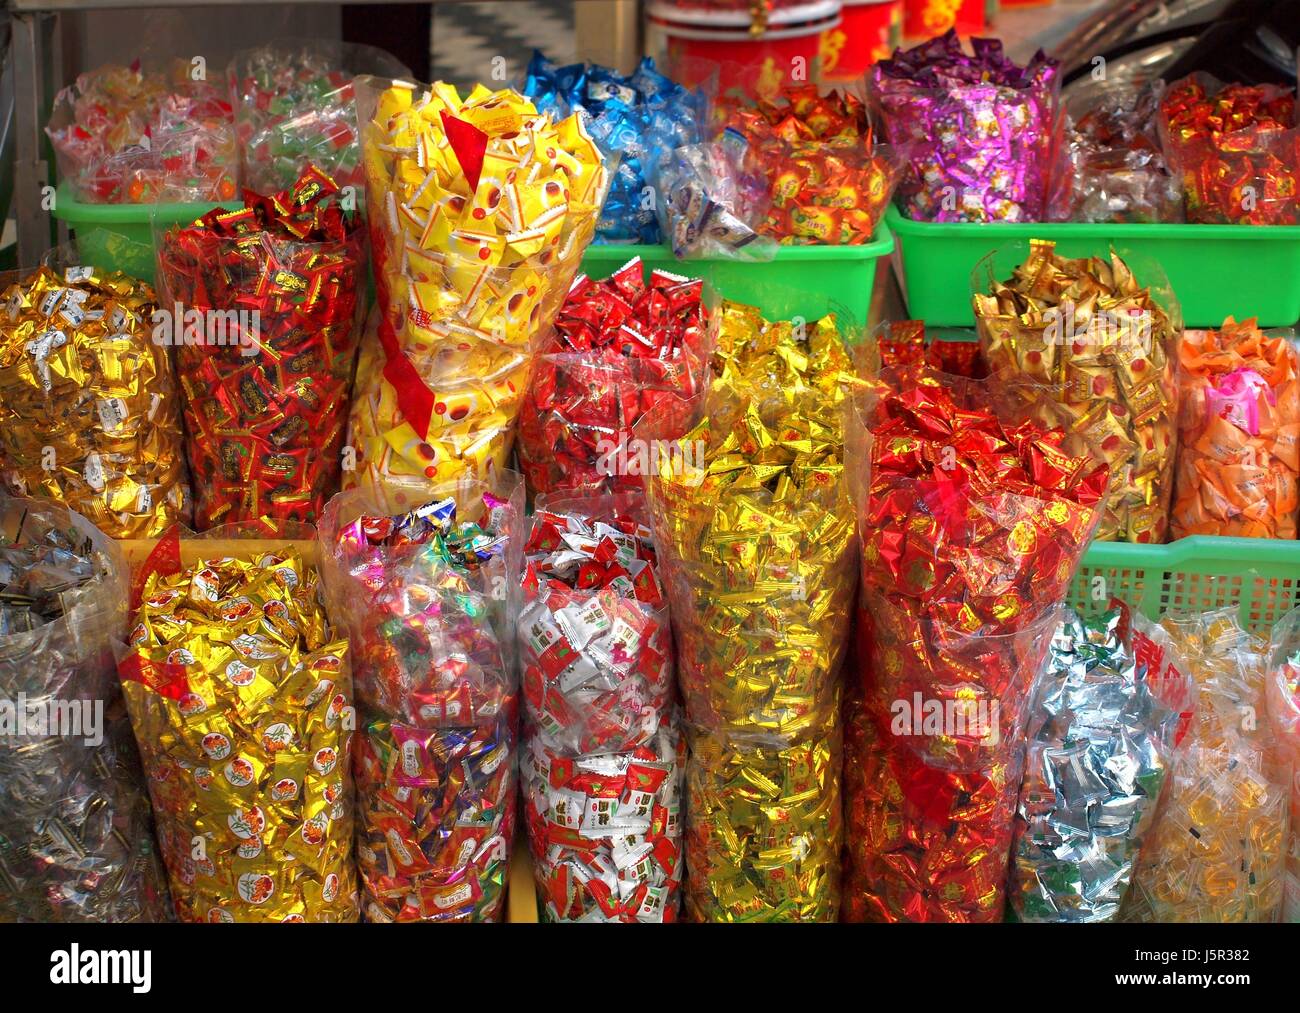 KAOHSIUNG, TAIWAN -- JANUARY 28, 2014: Large sacks of candy at an outdoor store. At Chinese New Year it is customary for people to have a variety of s Stock Photo